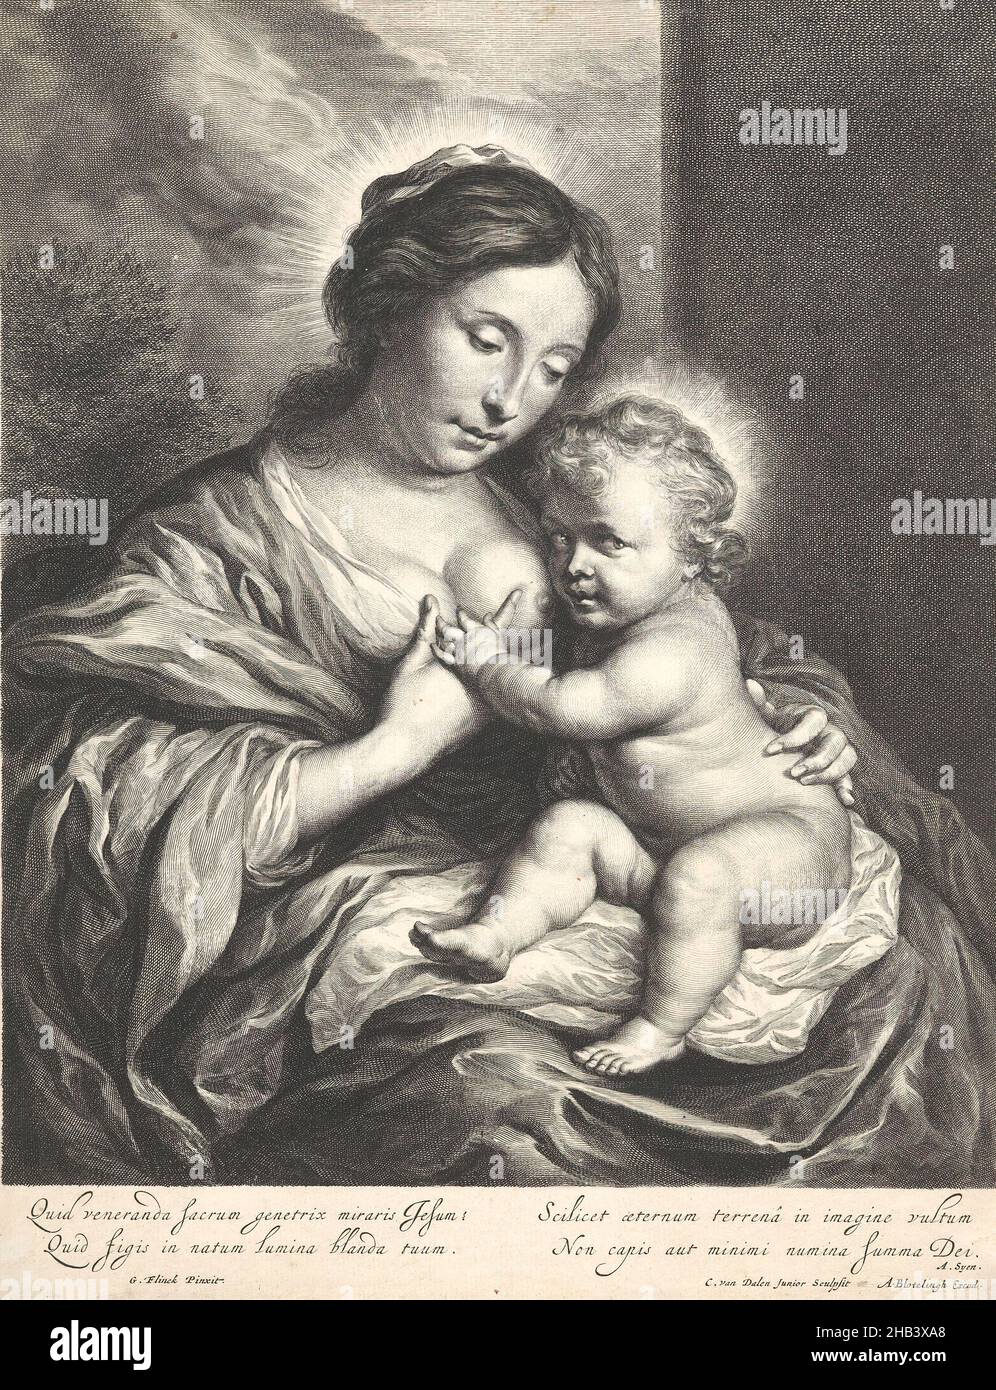 The Virgin with the Child., Cornelis van Dalen the Younger, engraver (printmaker), 1653-64, Netherlands, engraving, Cornelis van Dalen the Younger (1638-64) was, like his namesake father, an engraver from Amsterdam. The younger, short-lived Van Dalen produced reproductive engravings of very fine quality. This example, after a painting by Dutch Golden Age artist Govert (Govaert) Flinck (1615-60), a voluptuously baroque half-length Madonna of Humility, is no exception. The whereabouts of the original are unknown, showing the value of this often marginalised medium. Stock Photo